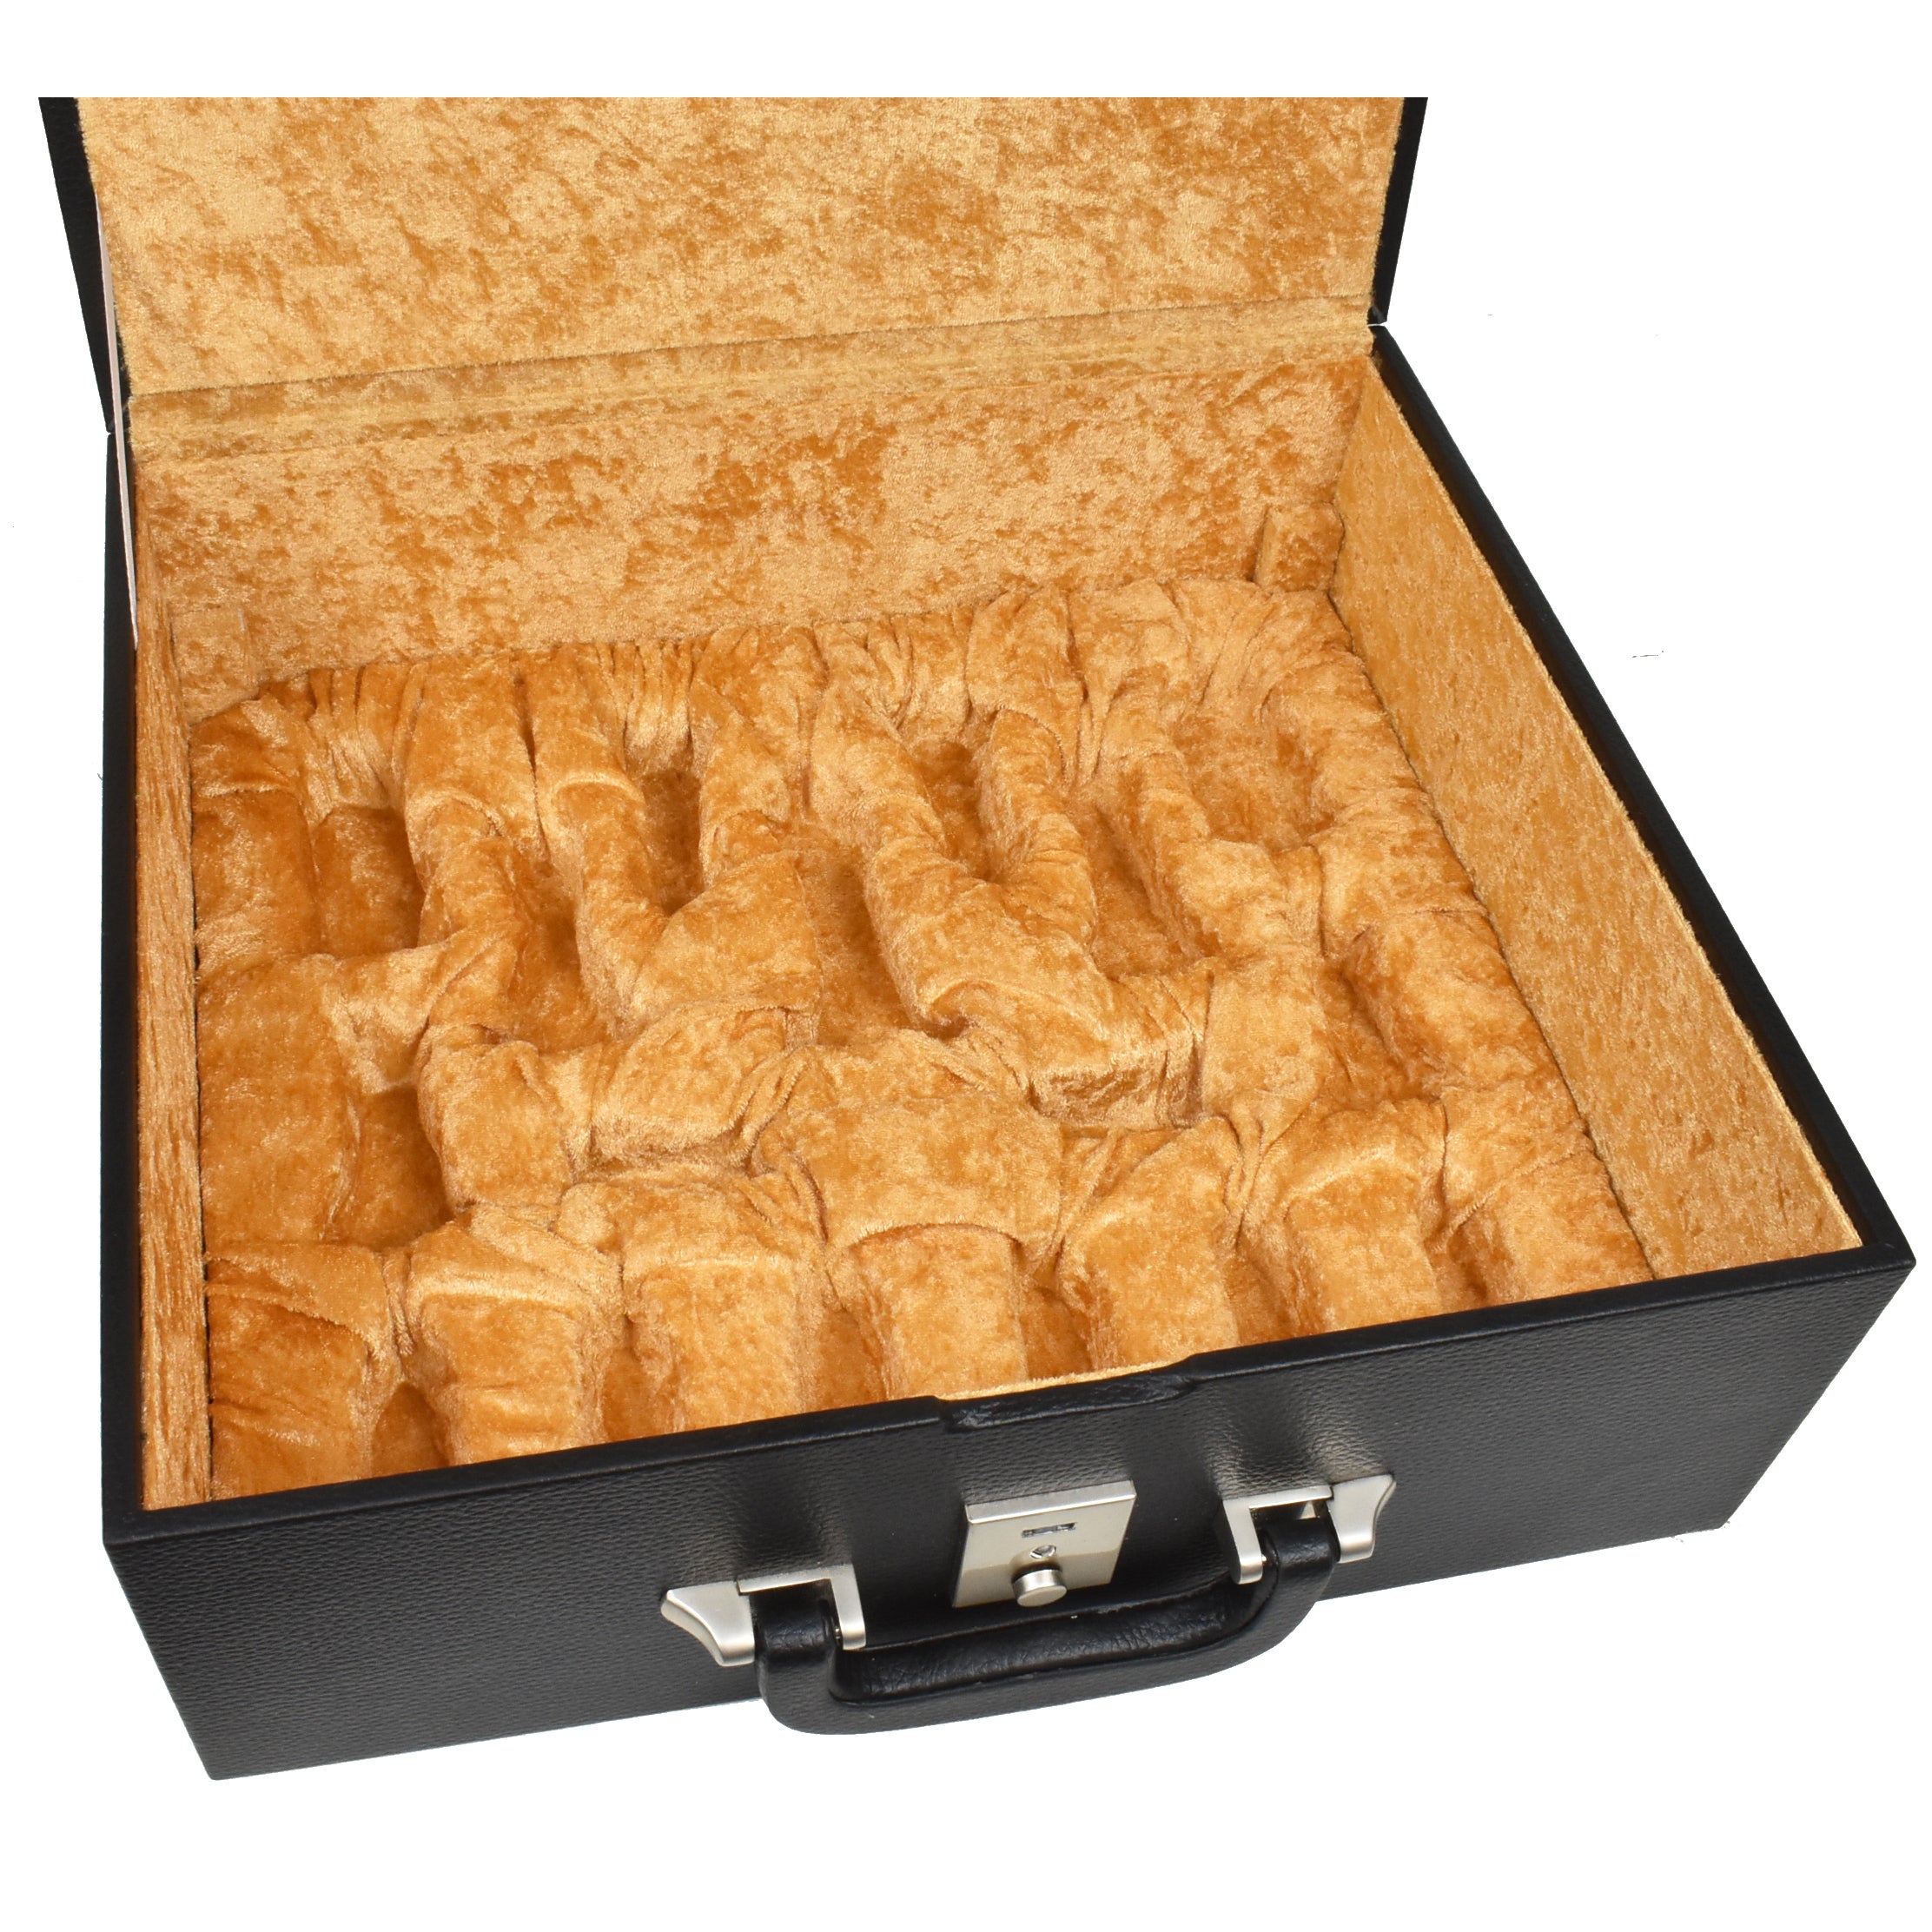 Combo of 4.5″ Carvers’ Art Luxury Chess Set - Pieces in Budrose Wood with Board and Box